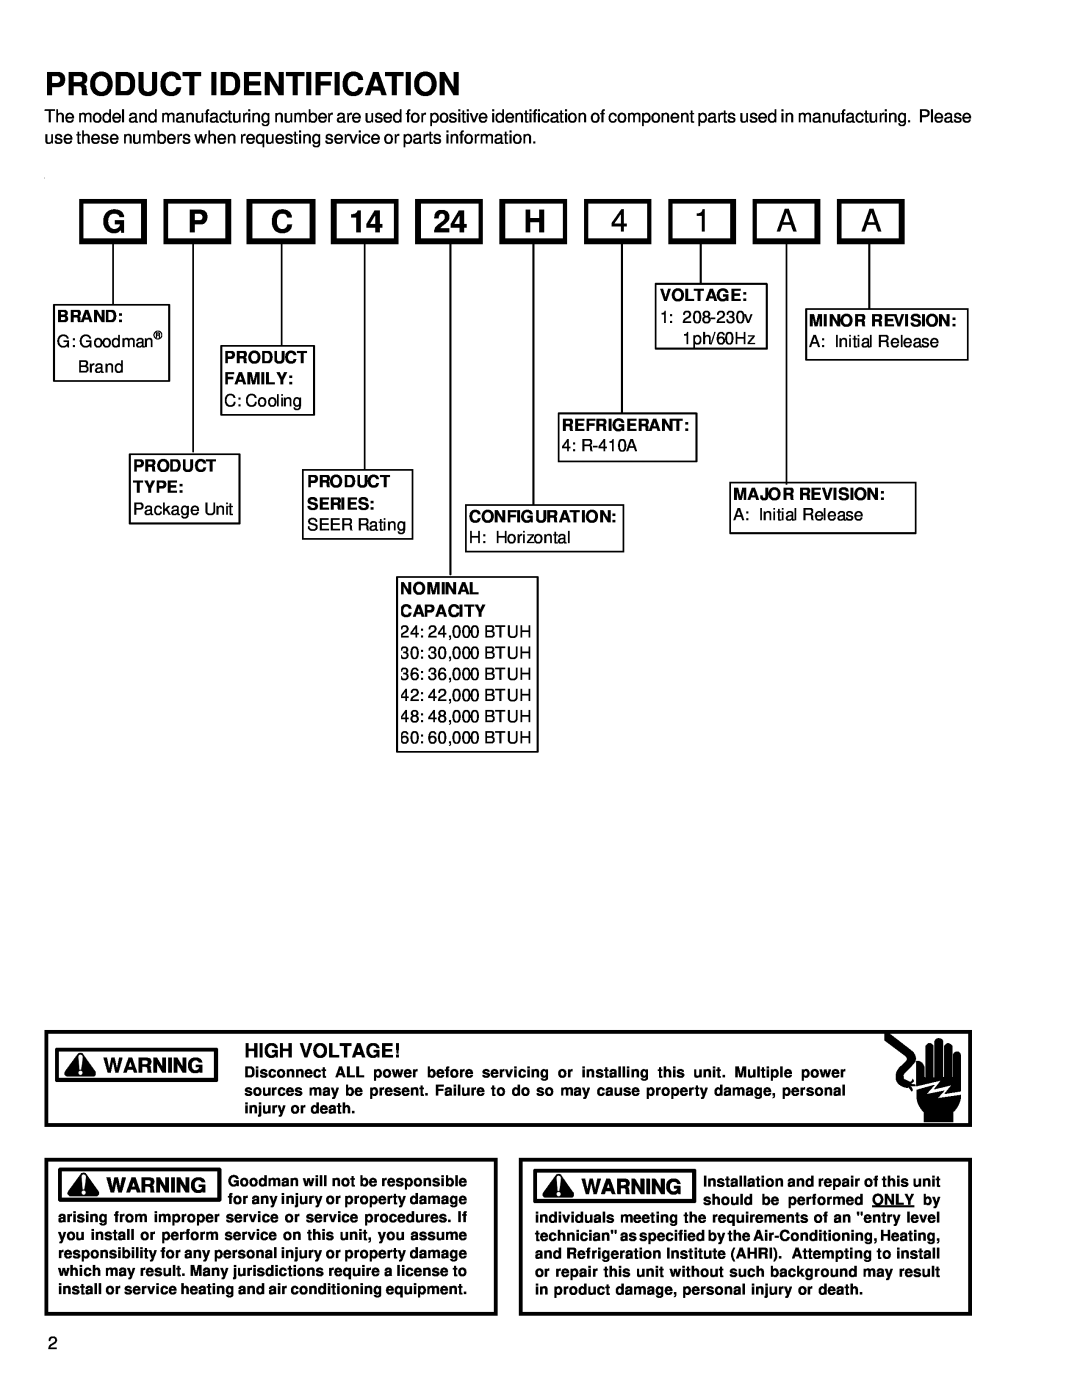 Goodman Mfg R-410A service manual Product Identification, High Voltage 